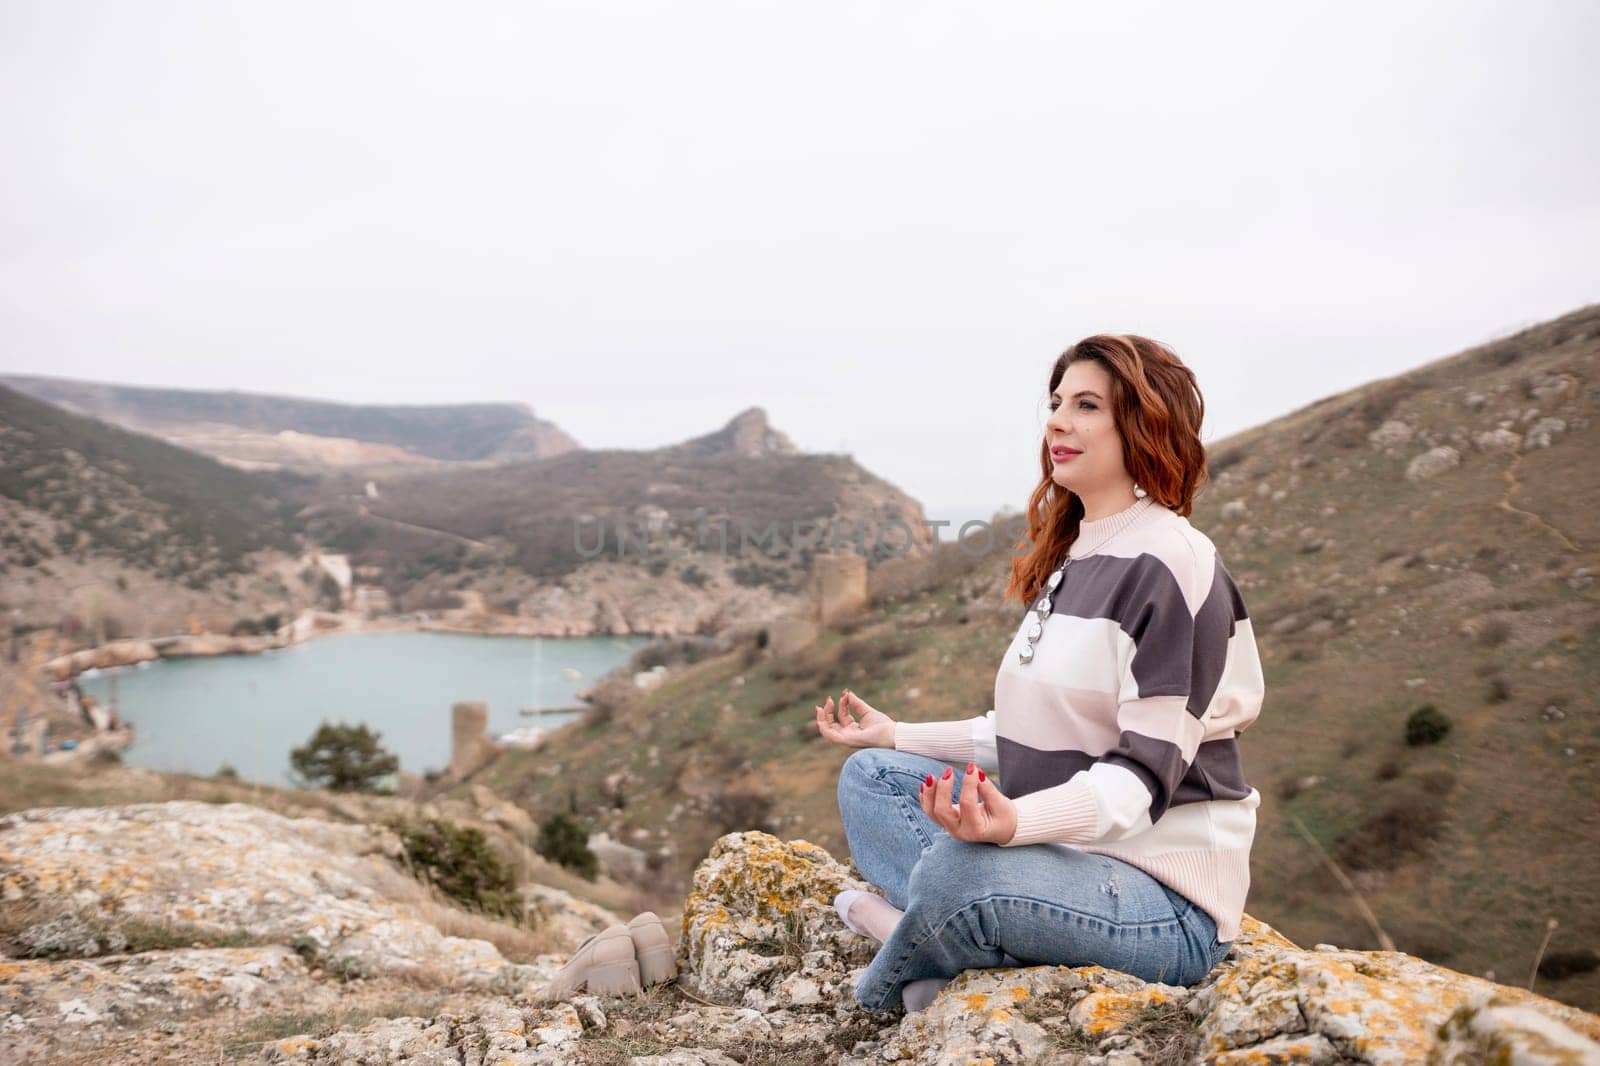 A woman is sitting on a rock overlooking a body of water. The scene is peaceful and serene, with the woman looking out over the water and taking in the view. by Matiunina